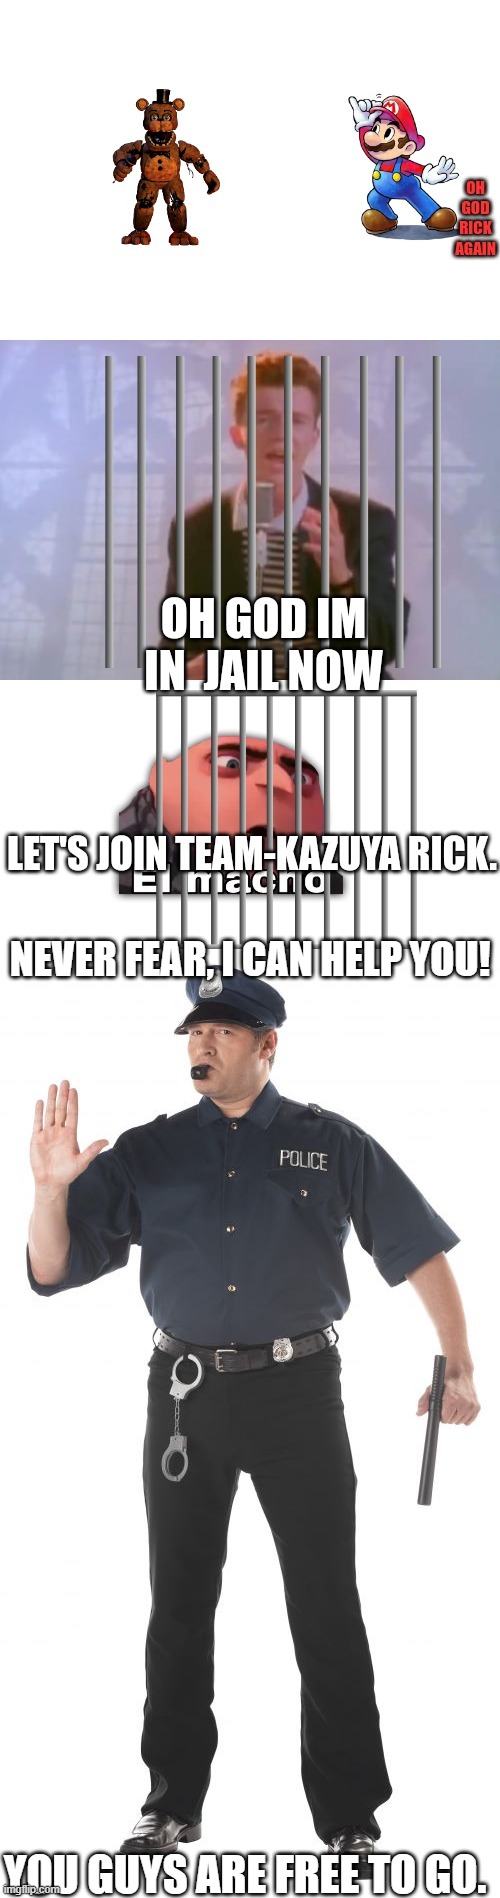 NEVER FEAR, I CAN HELP YOU! YOU GUYS ARE FREE TO GO. | image tagged in memes,stop cop | made w/ Imgflip meme maker